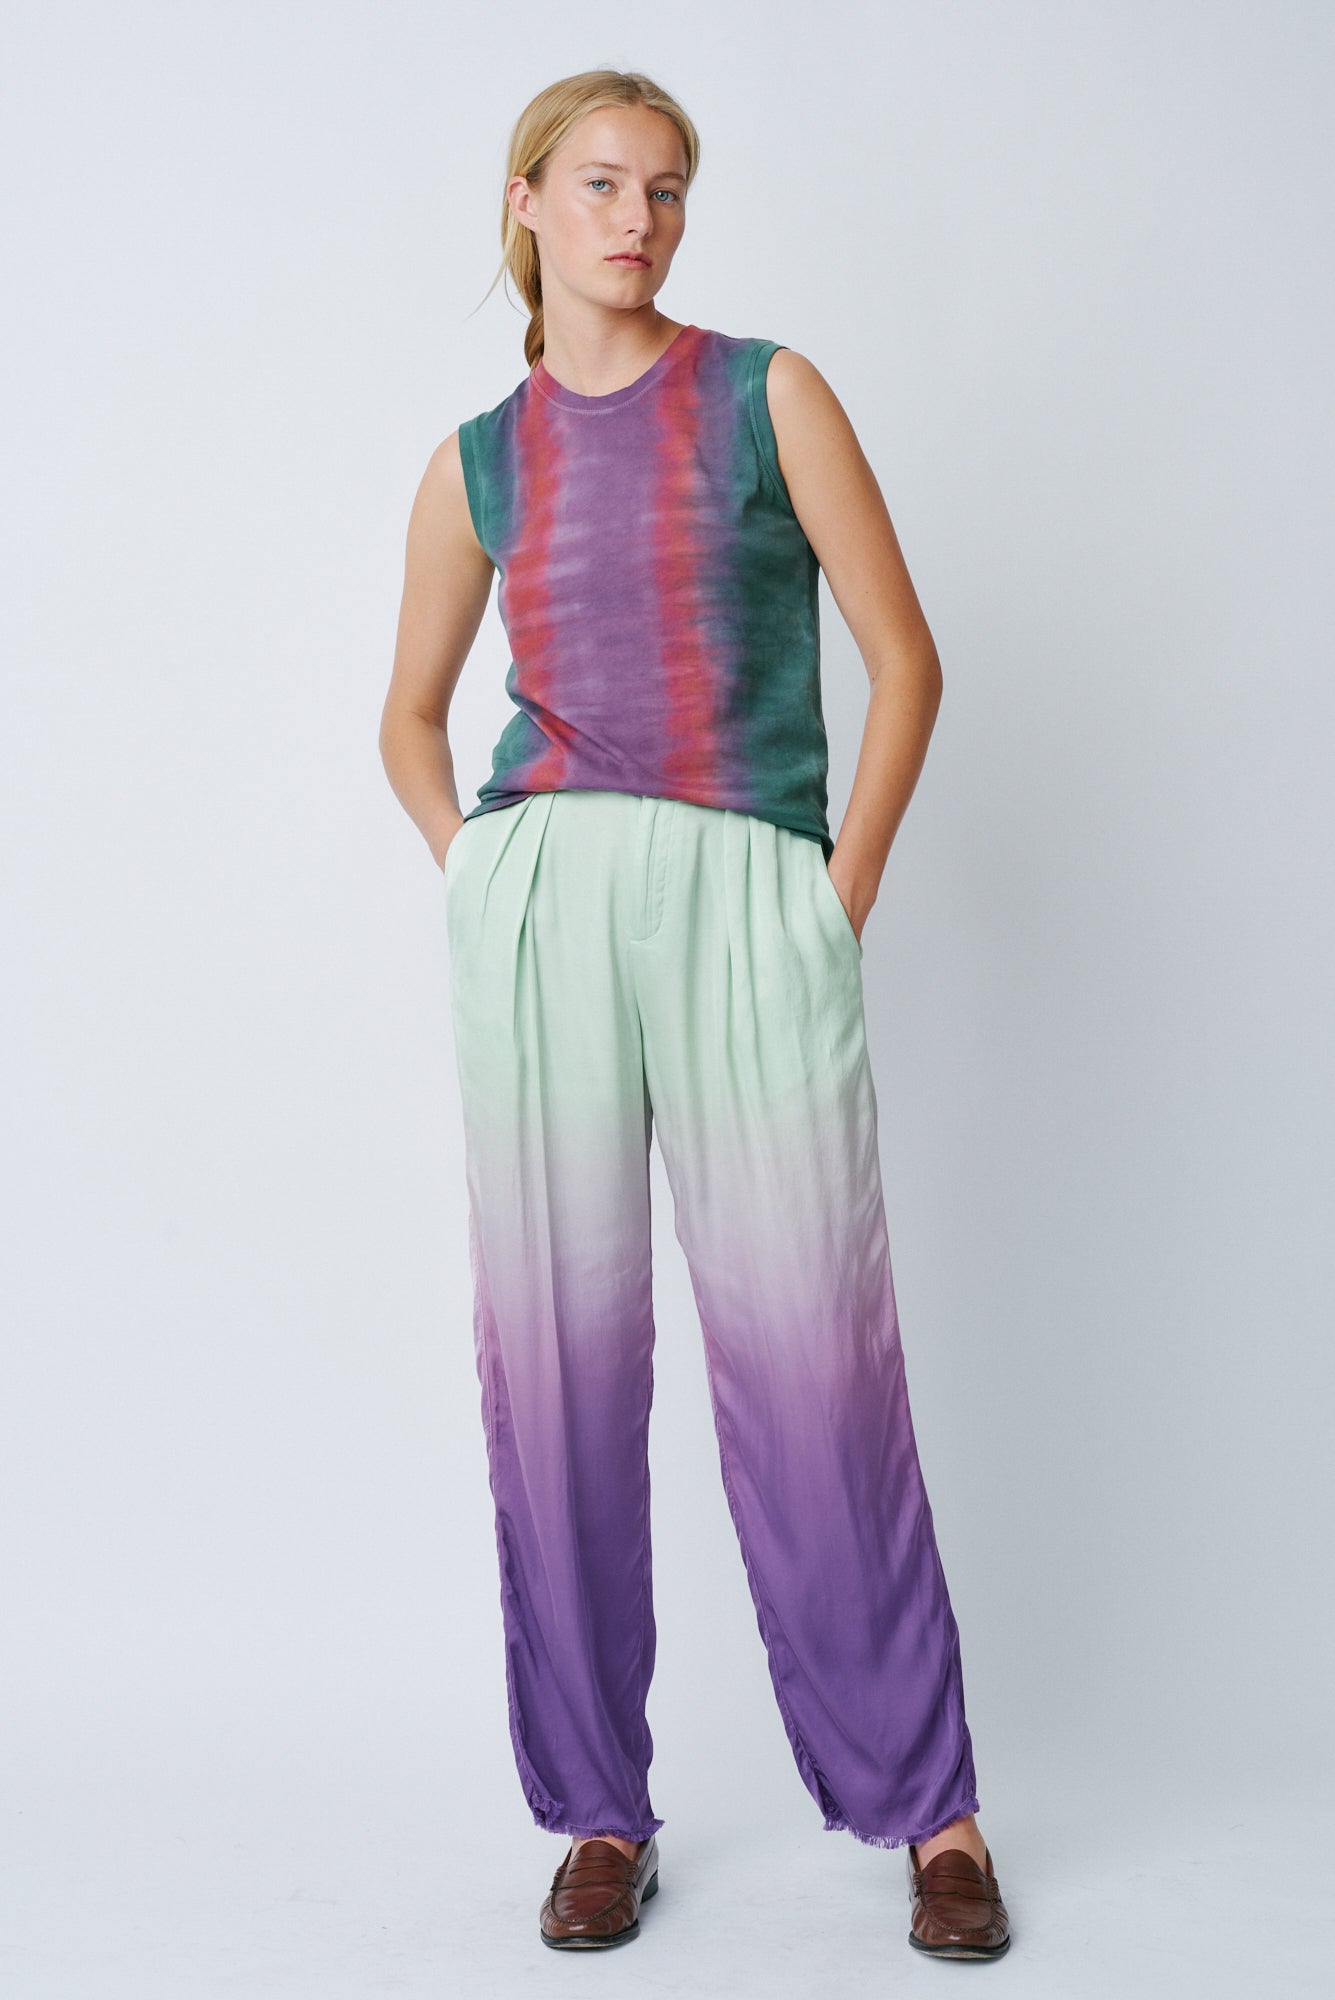 Fantasy Tiger Tie Dye Classic Jersey Fitted Muscle RA-TOP/JERSEY ARCHIVE-PREFALL'22   